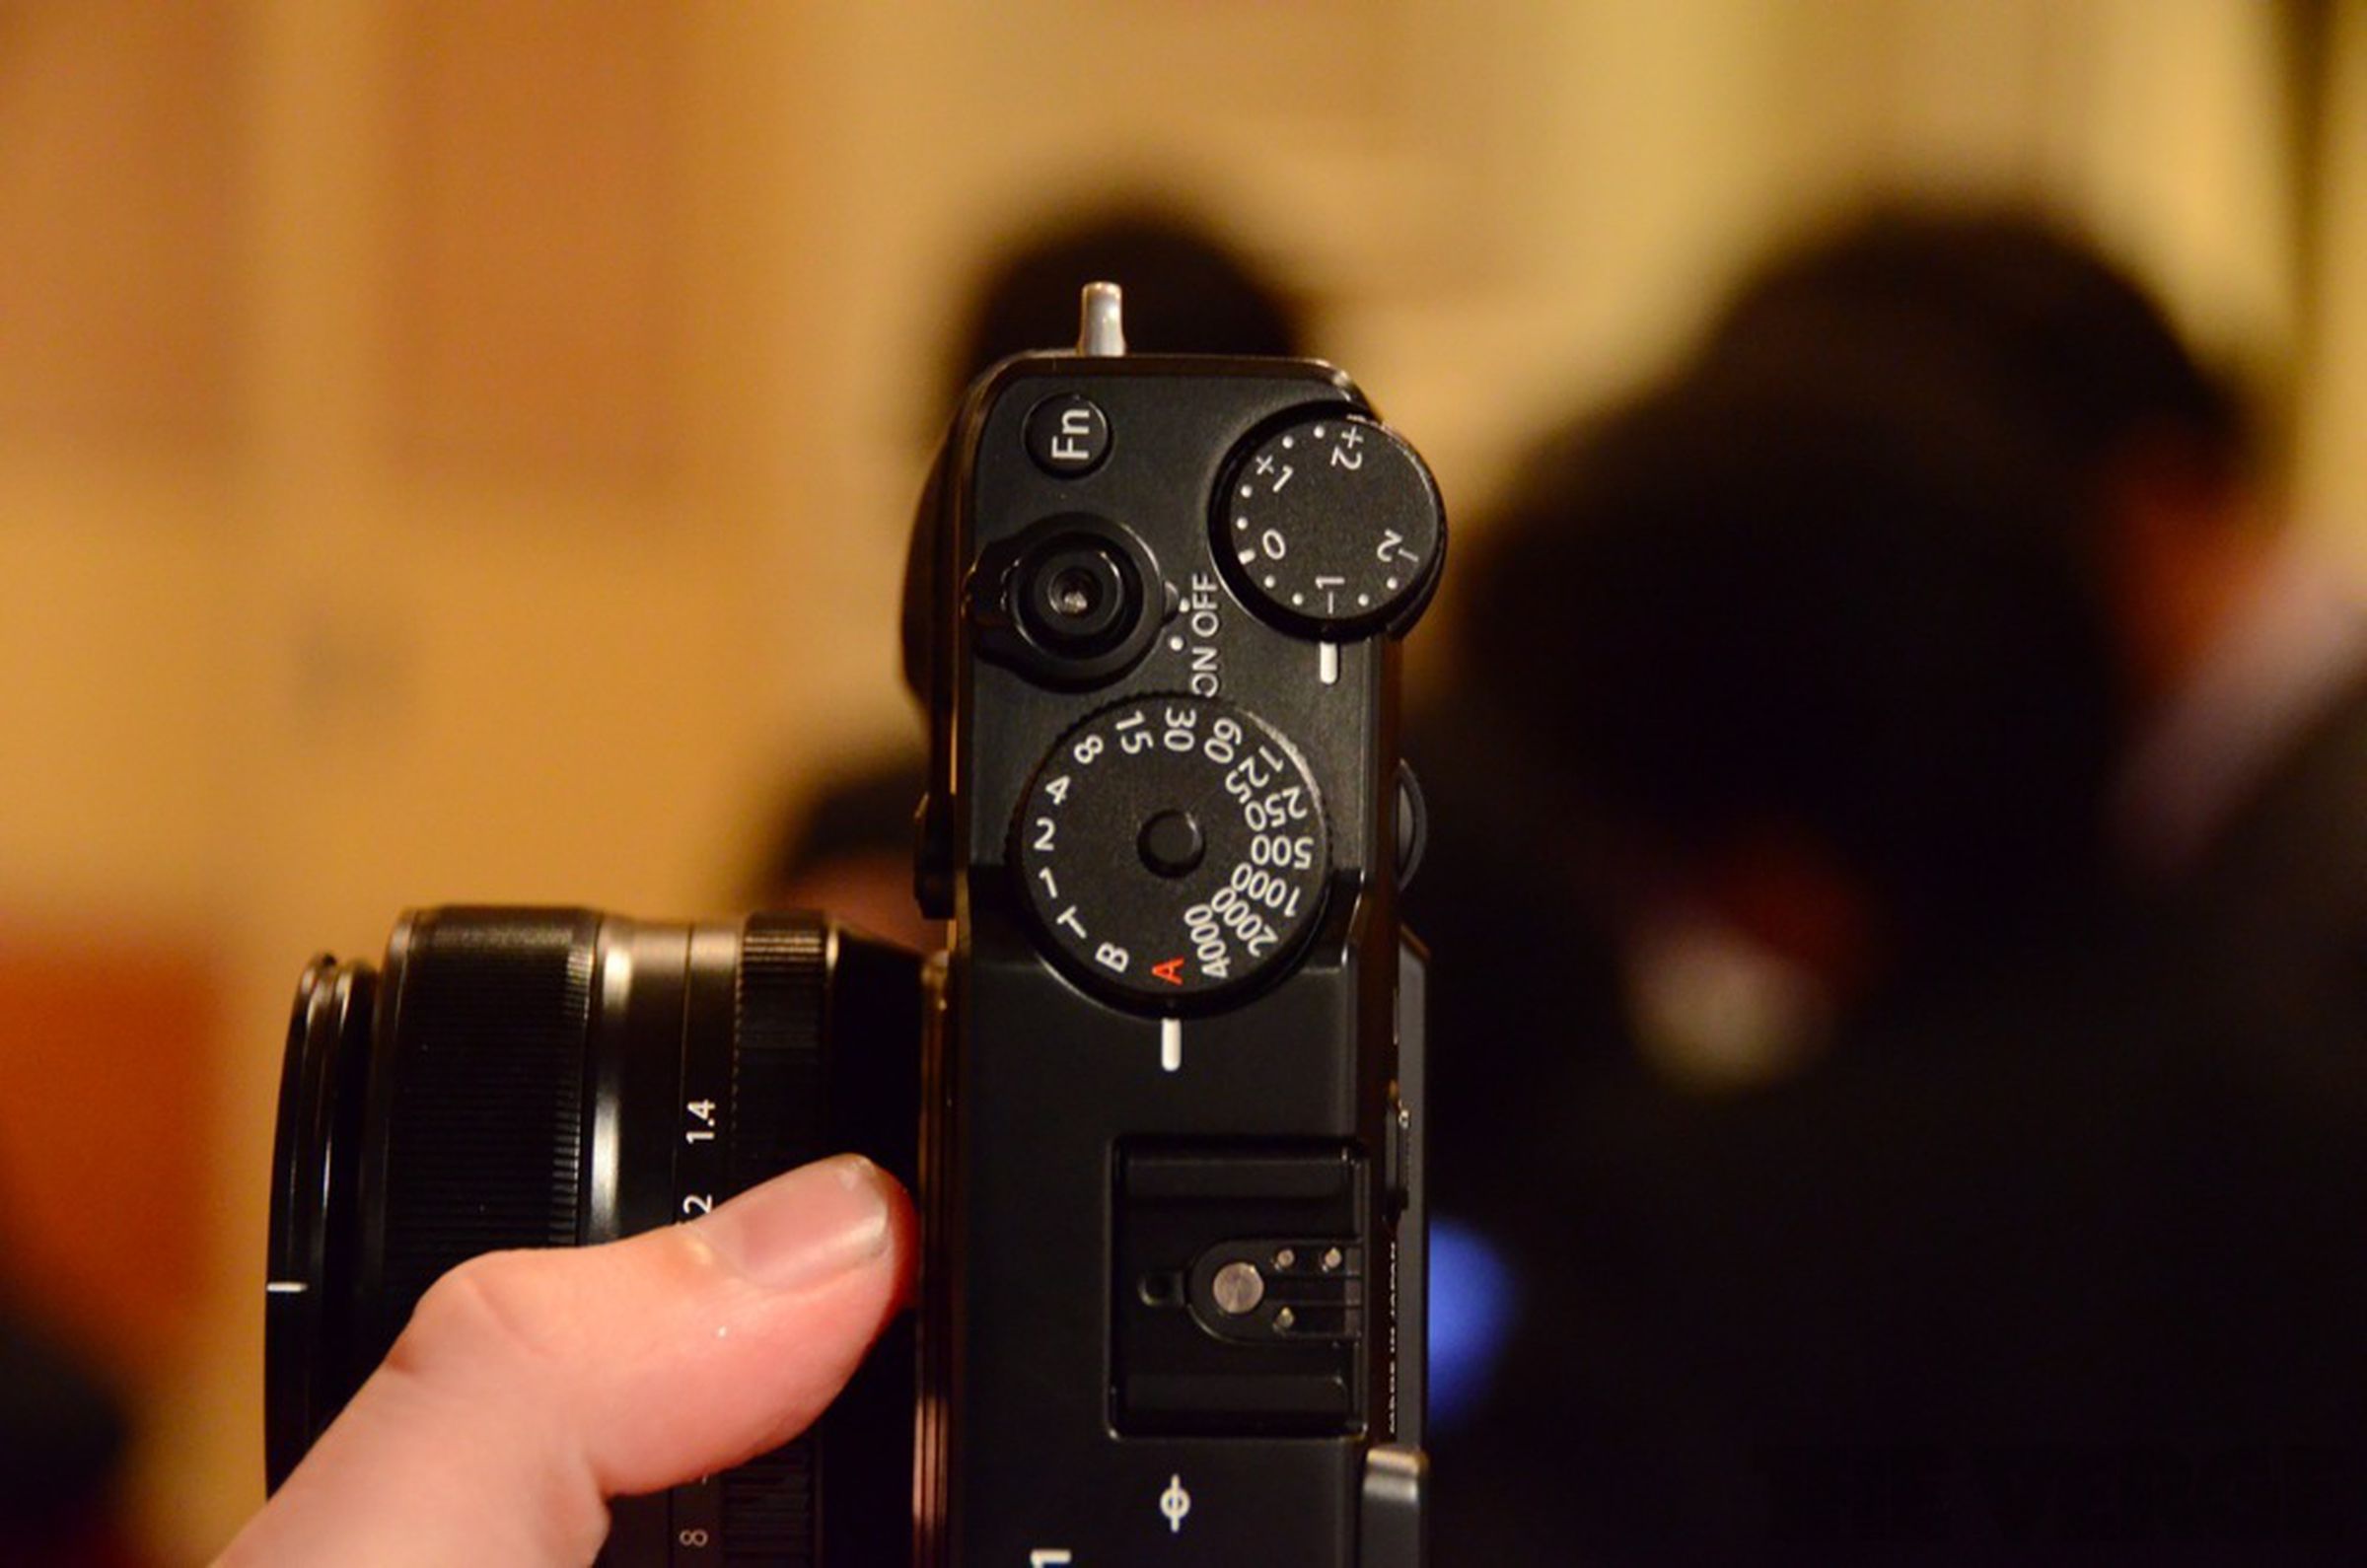 Fujifilm X-Pro1 hands-on pictures